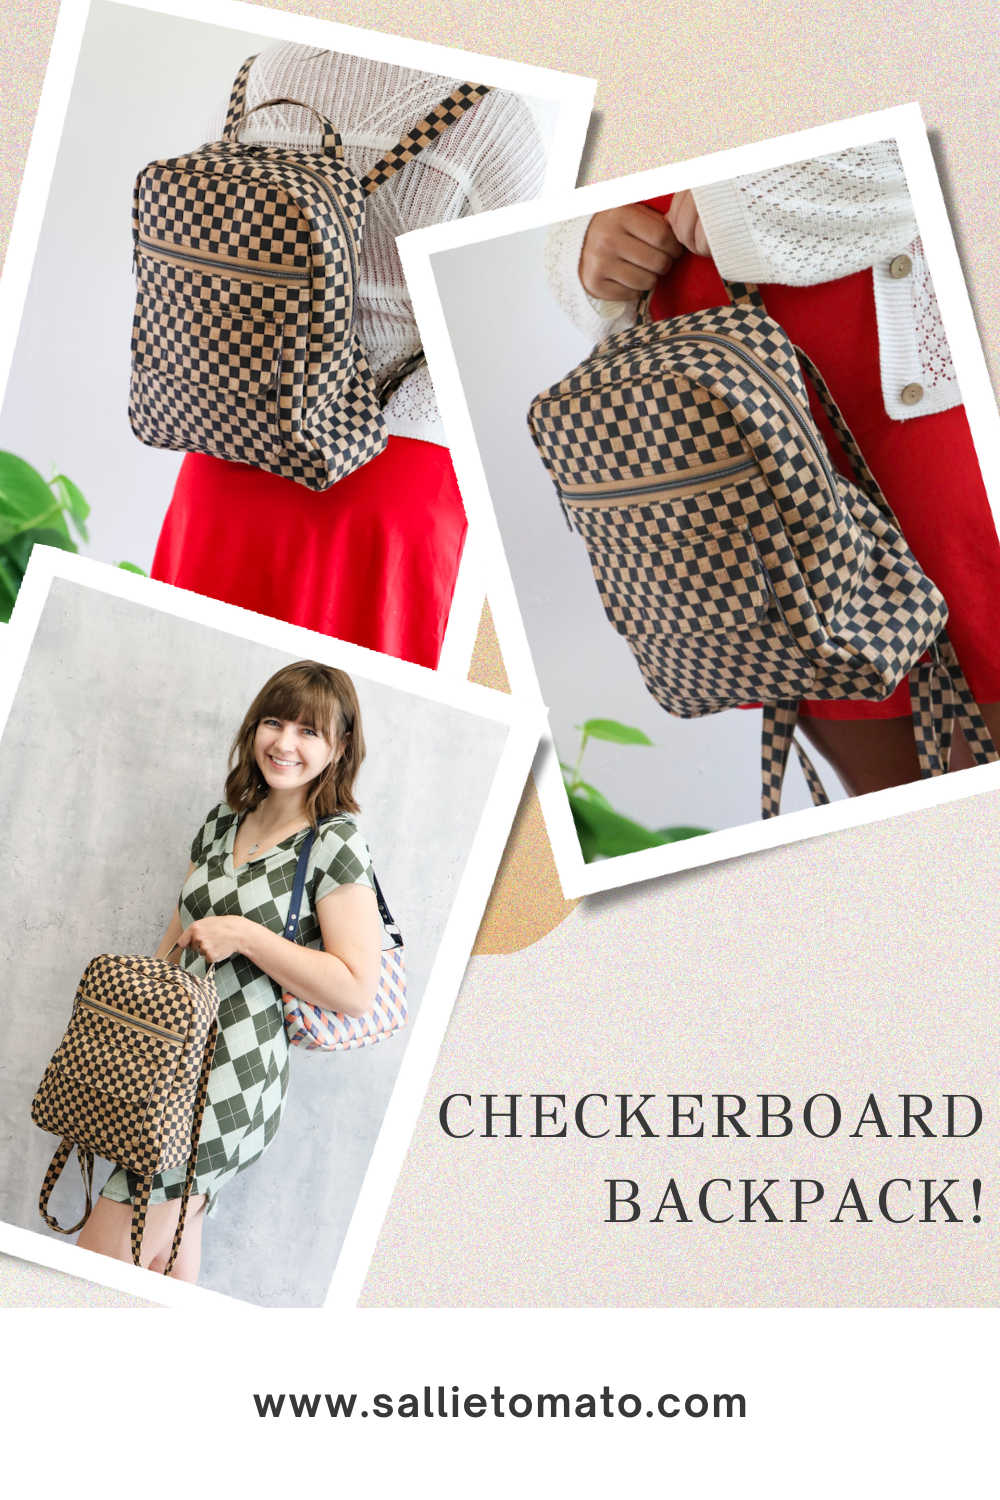 Checkerboard Backpack!